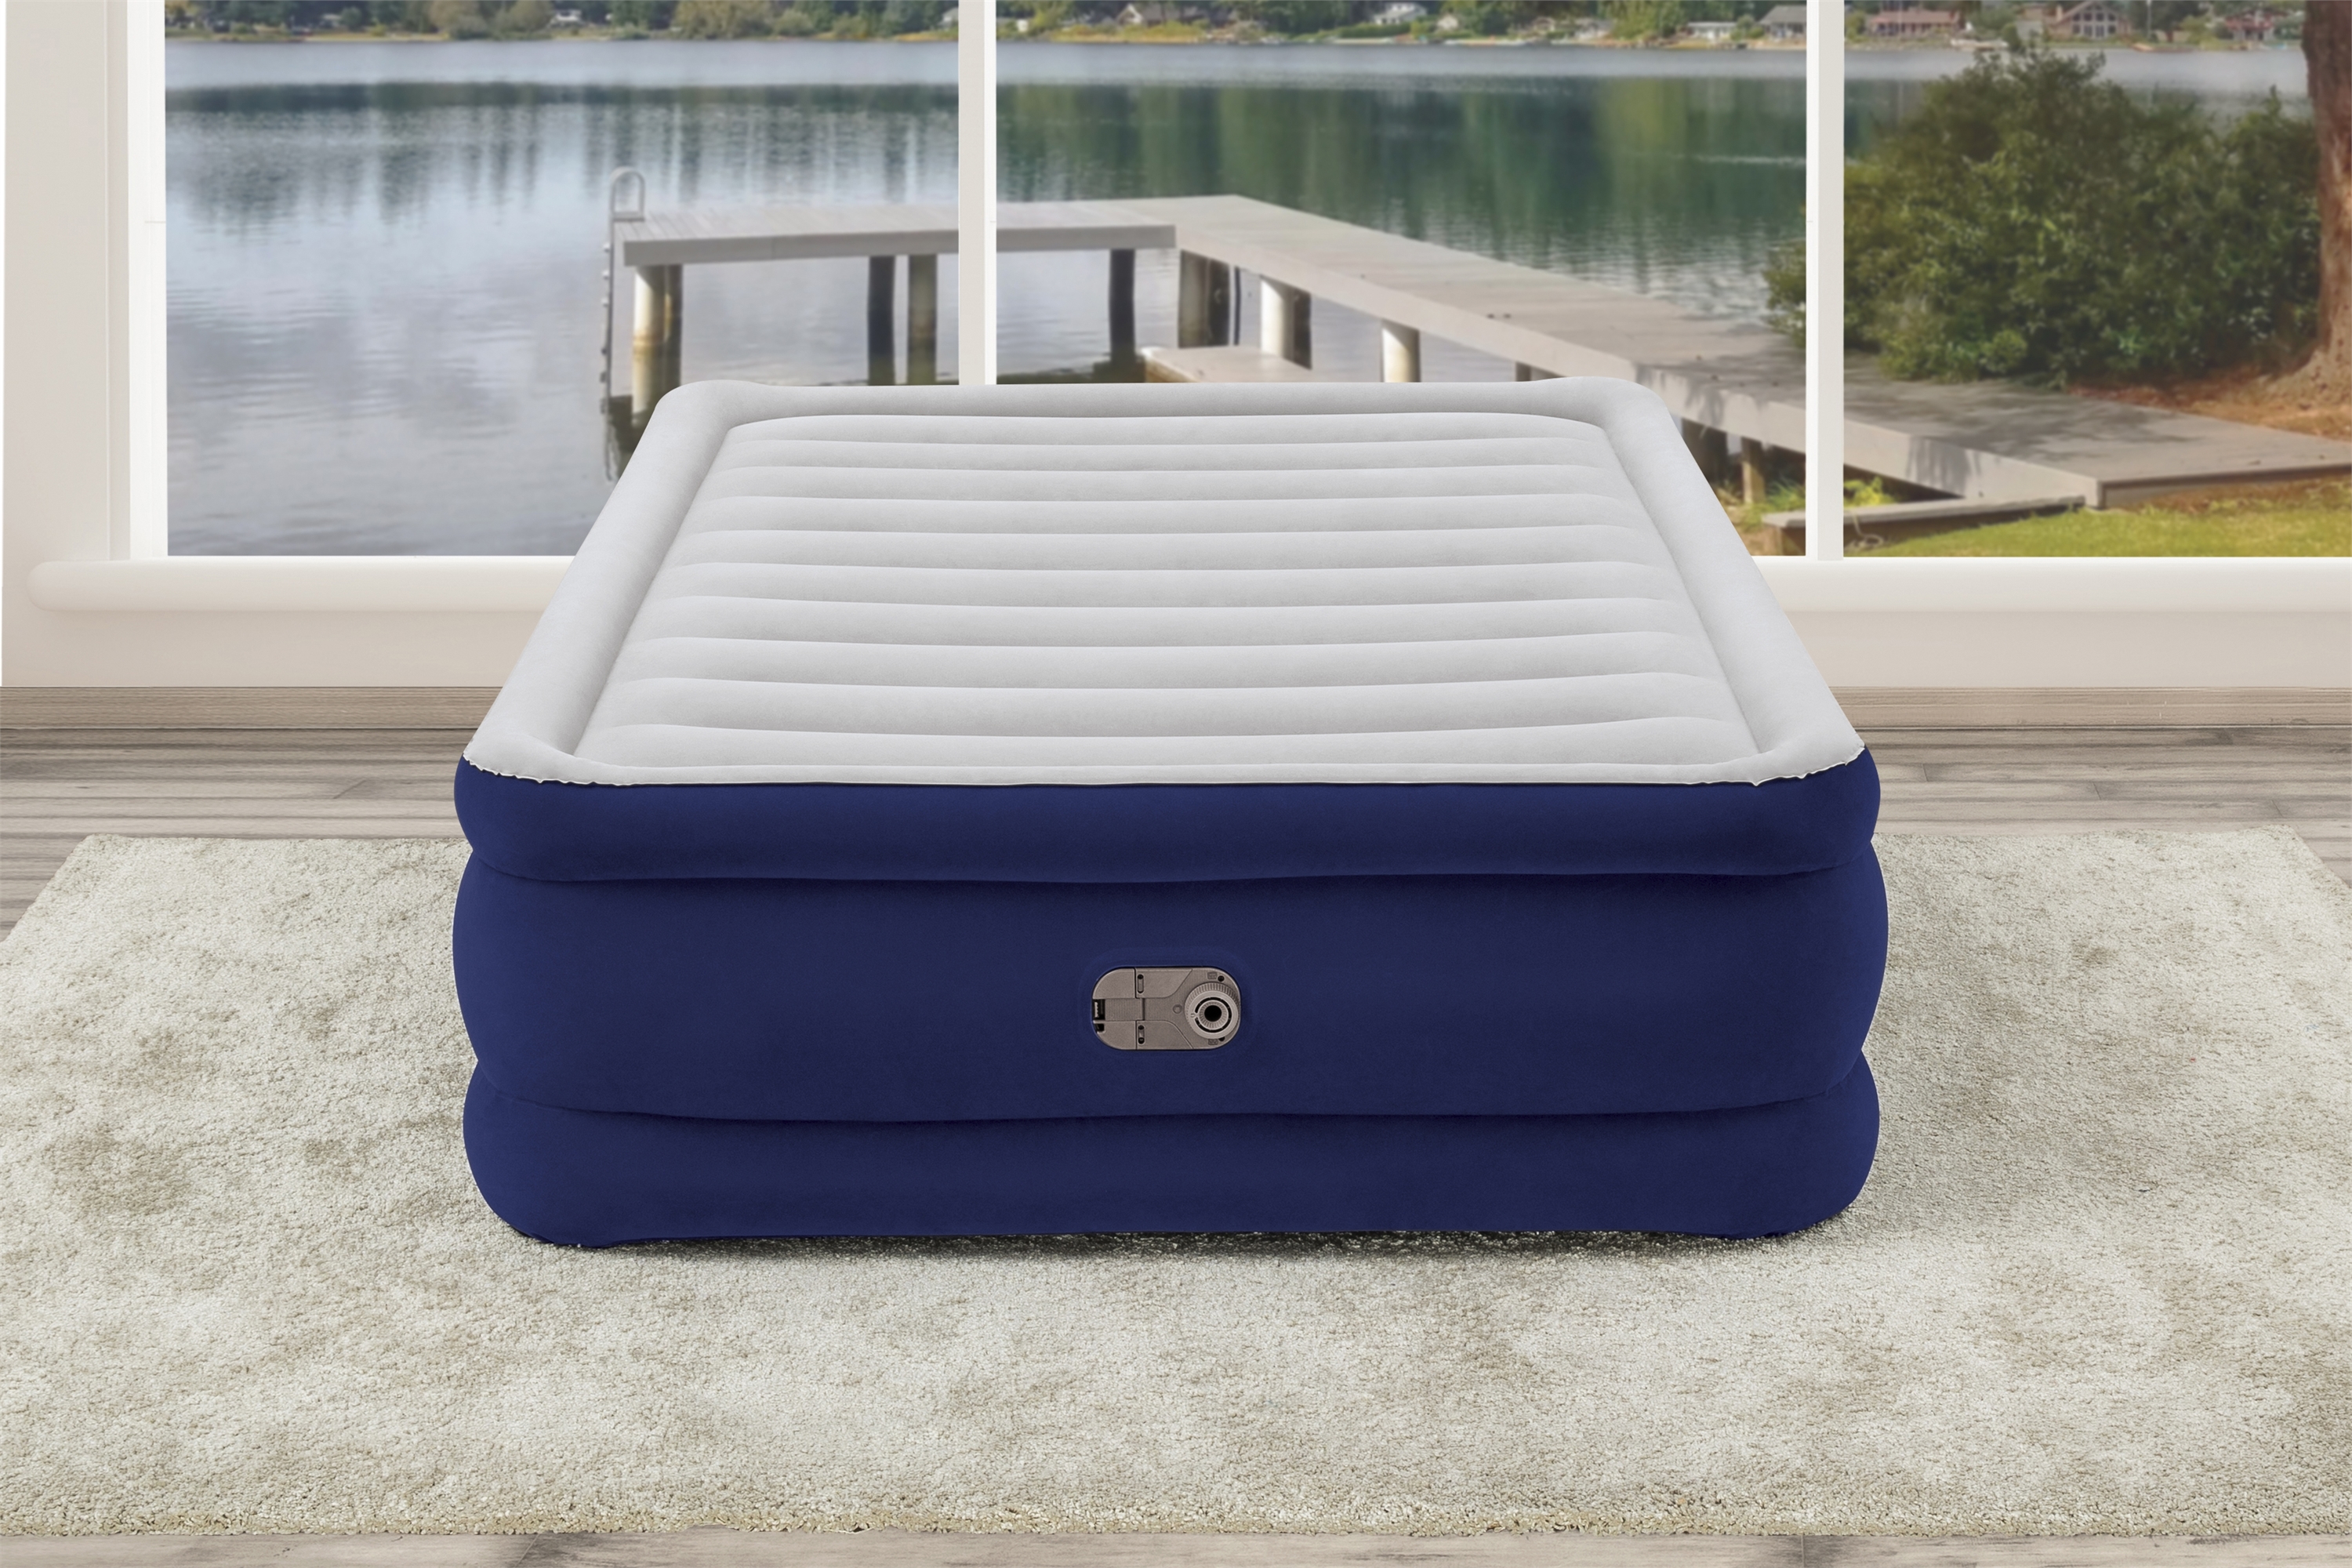 Bestway Tritech Air Mattress Queen 22 in. with Built-in AC Pump and Antimicrobial Coating - image 3 of 12